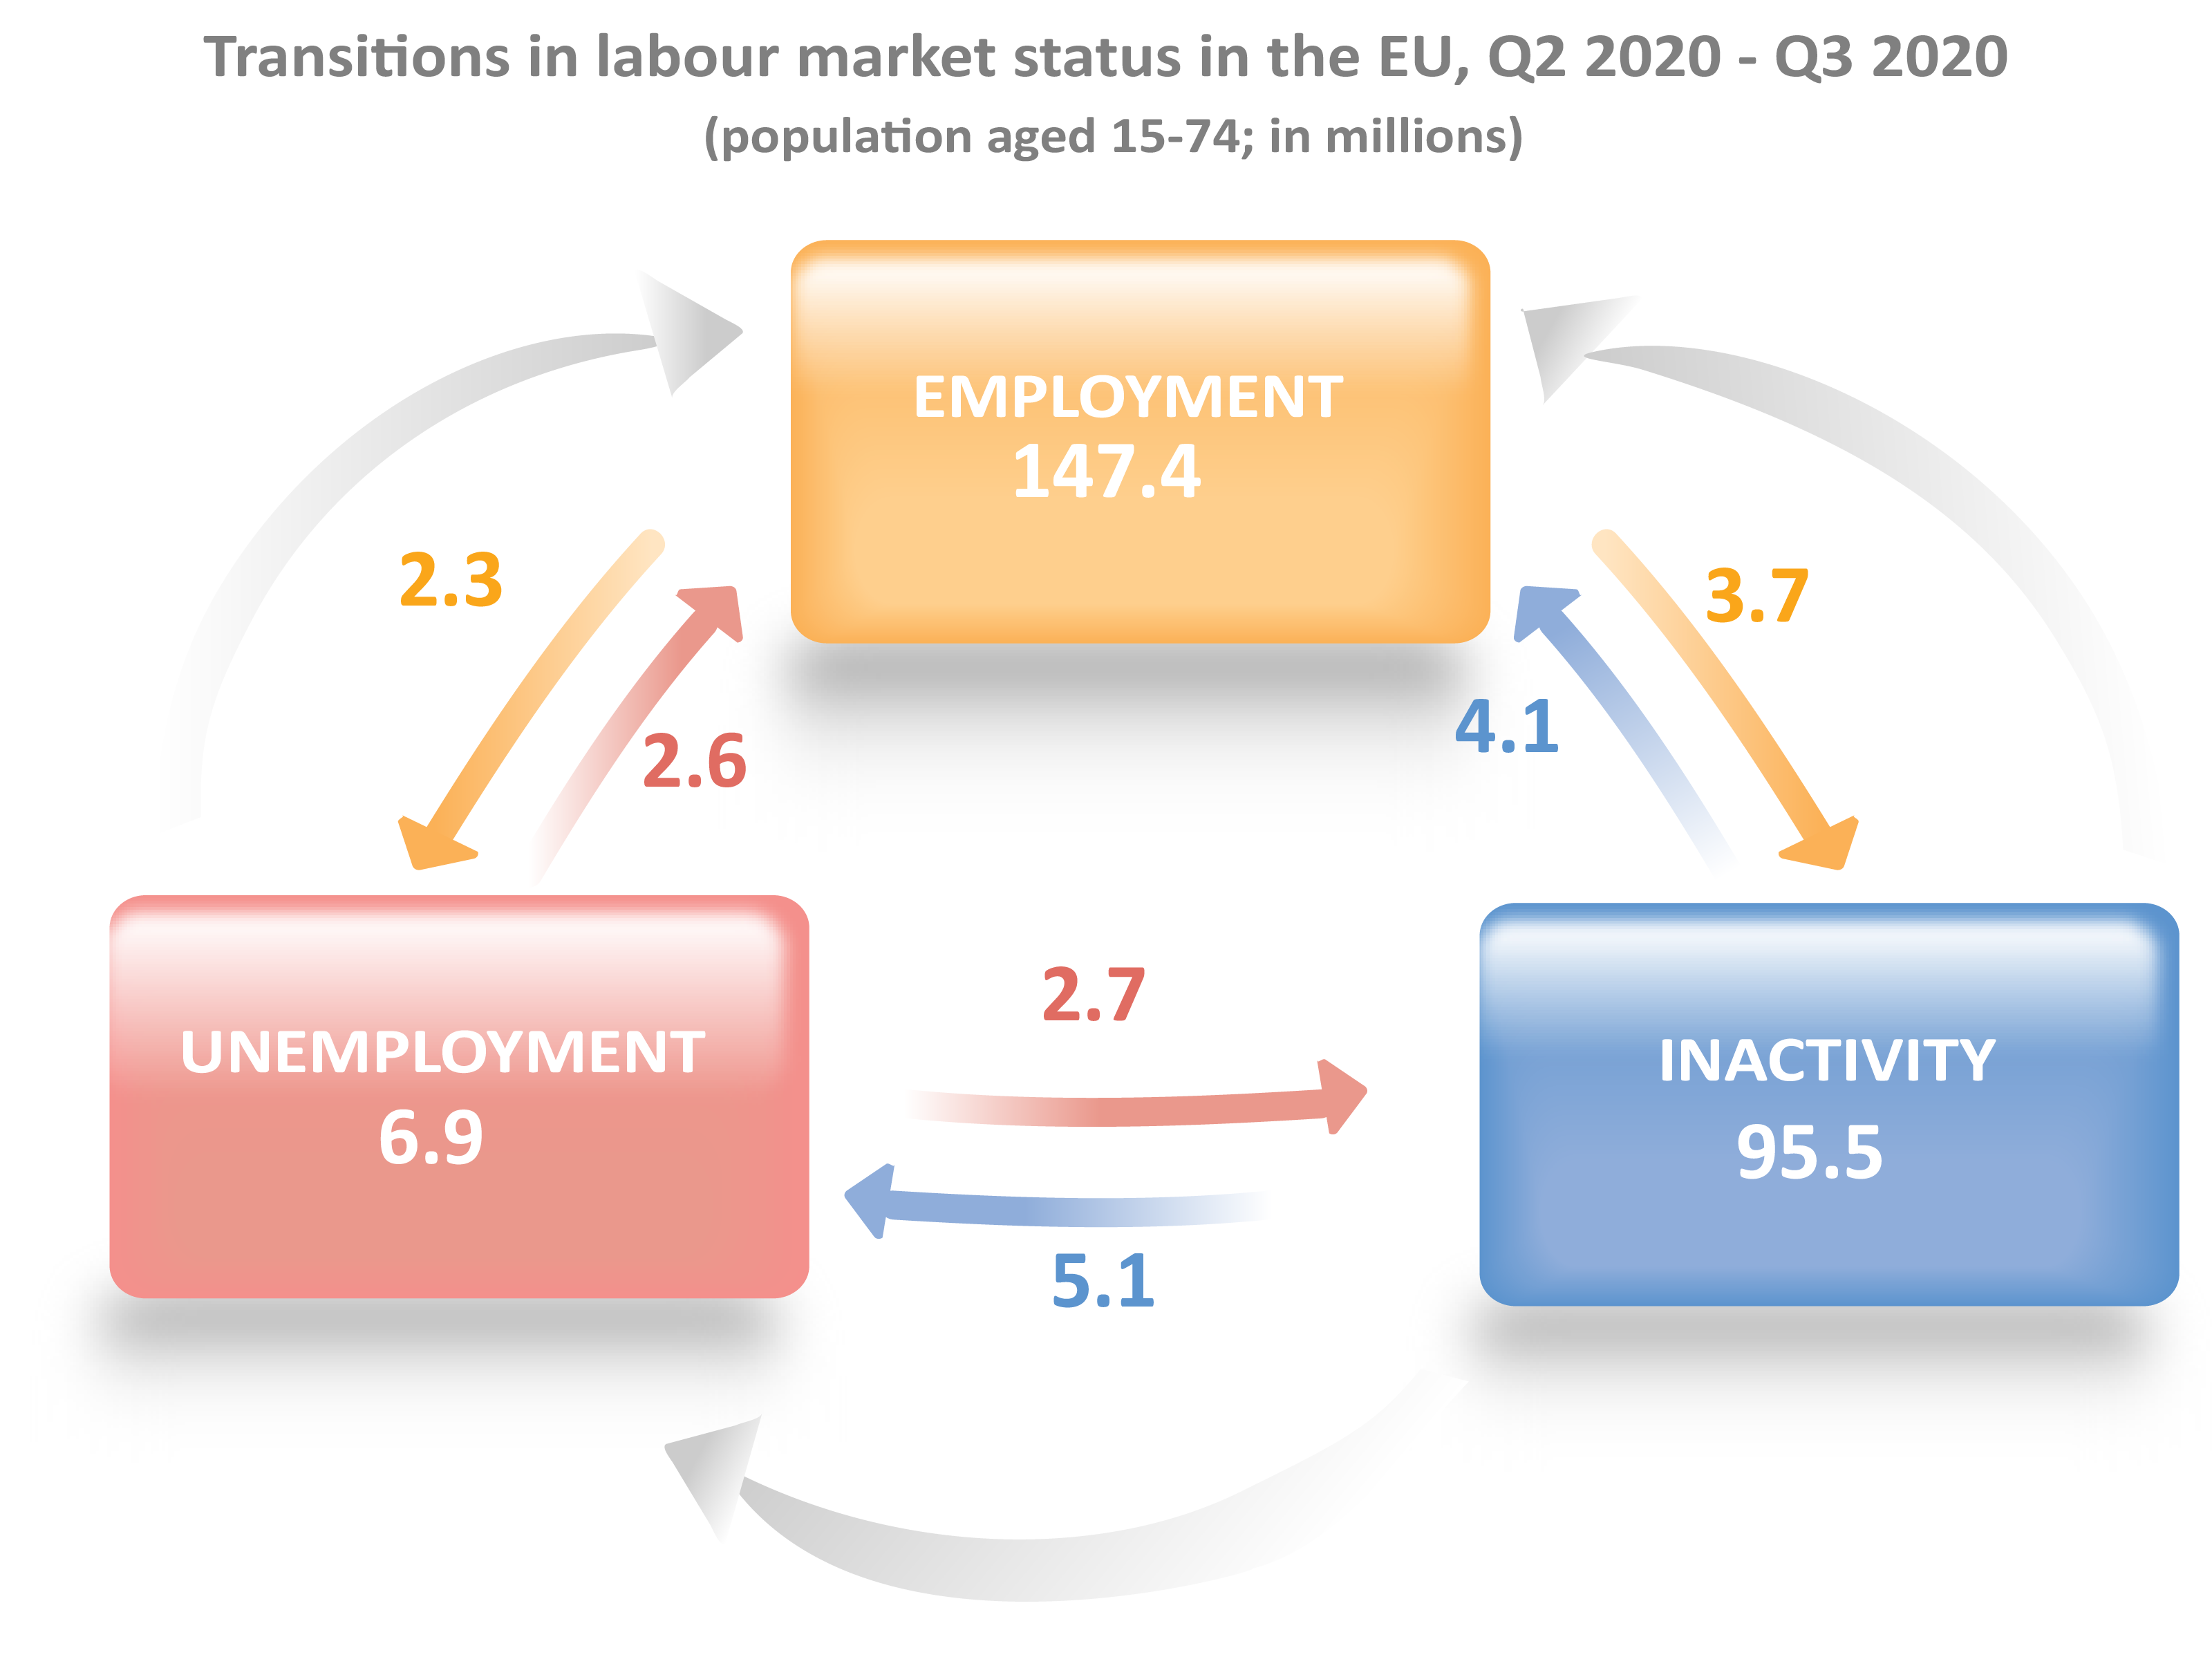 Transitions in labour market status in the EU, Q2 2020 - Q3 2020 (in millions)